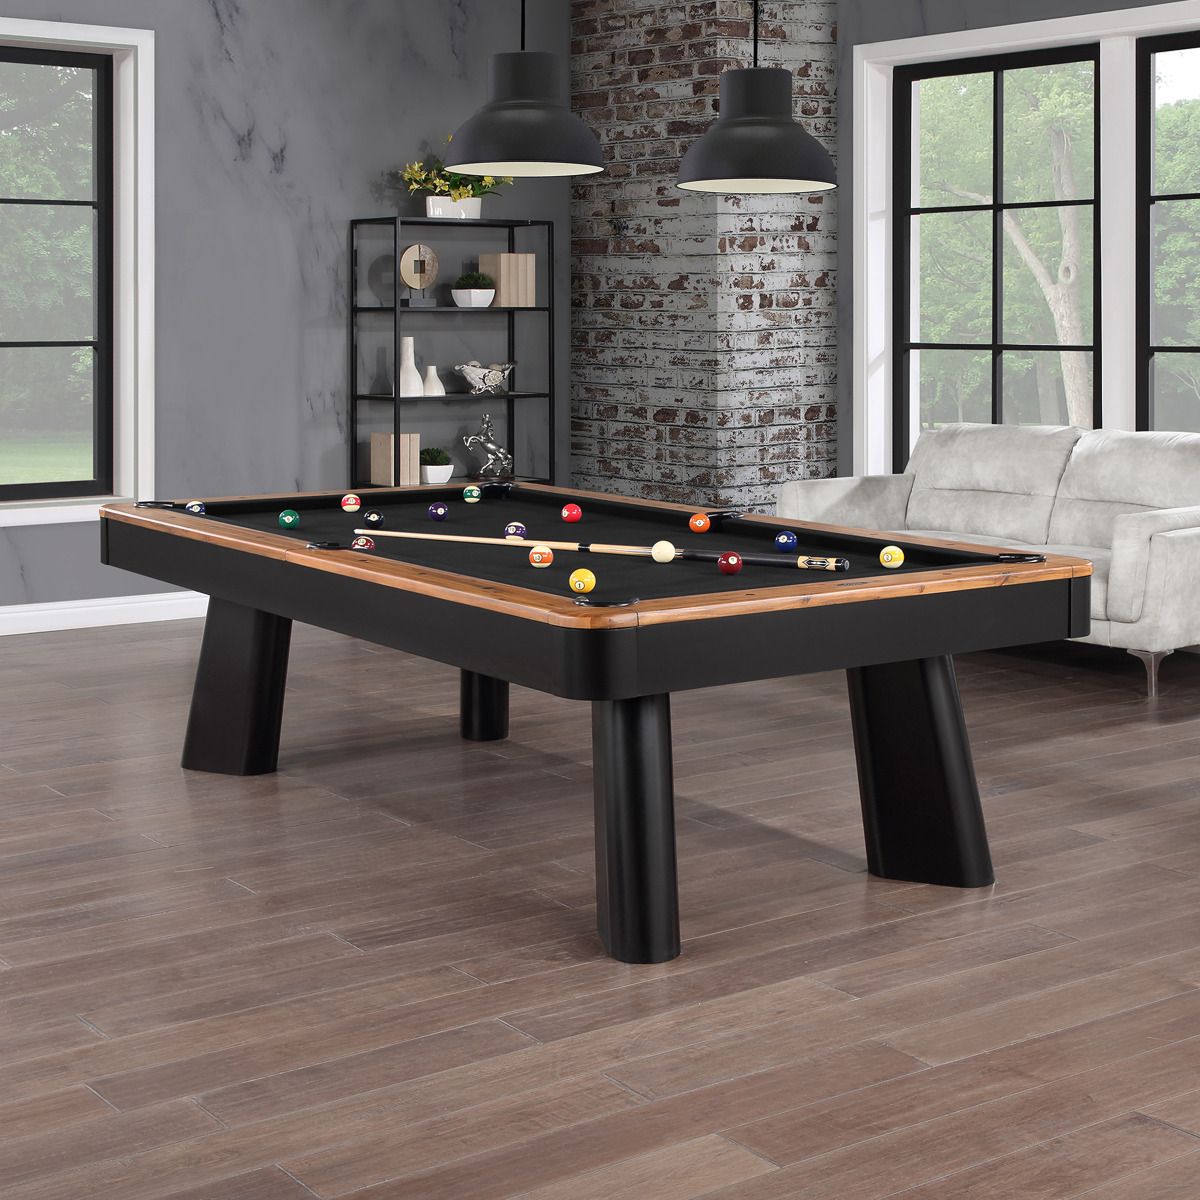 The Nouveau pool table by Imperial